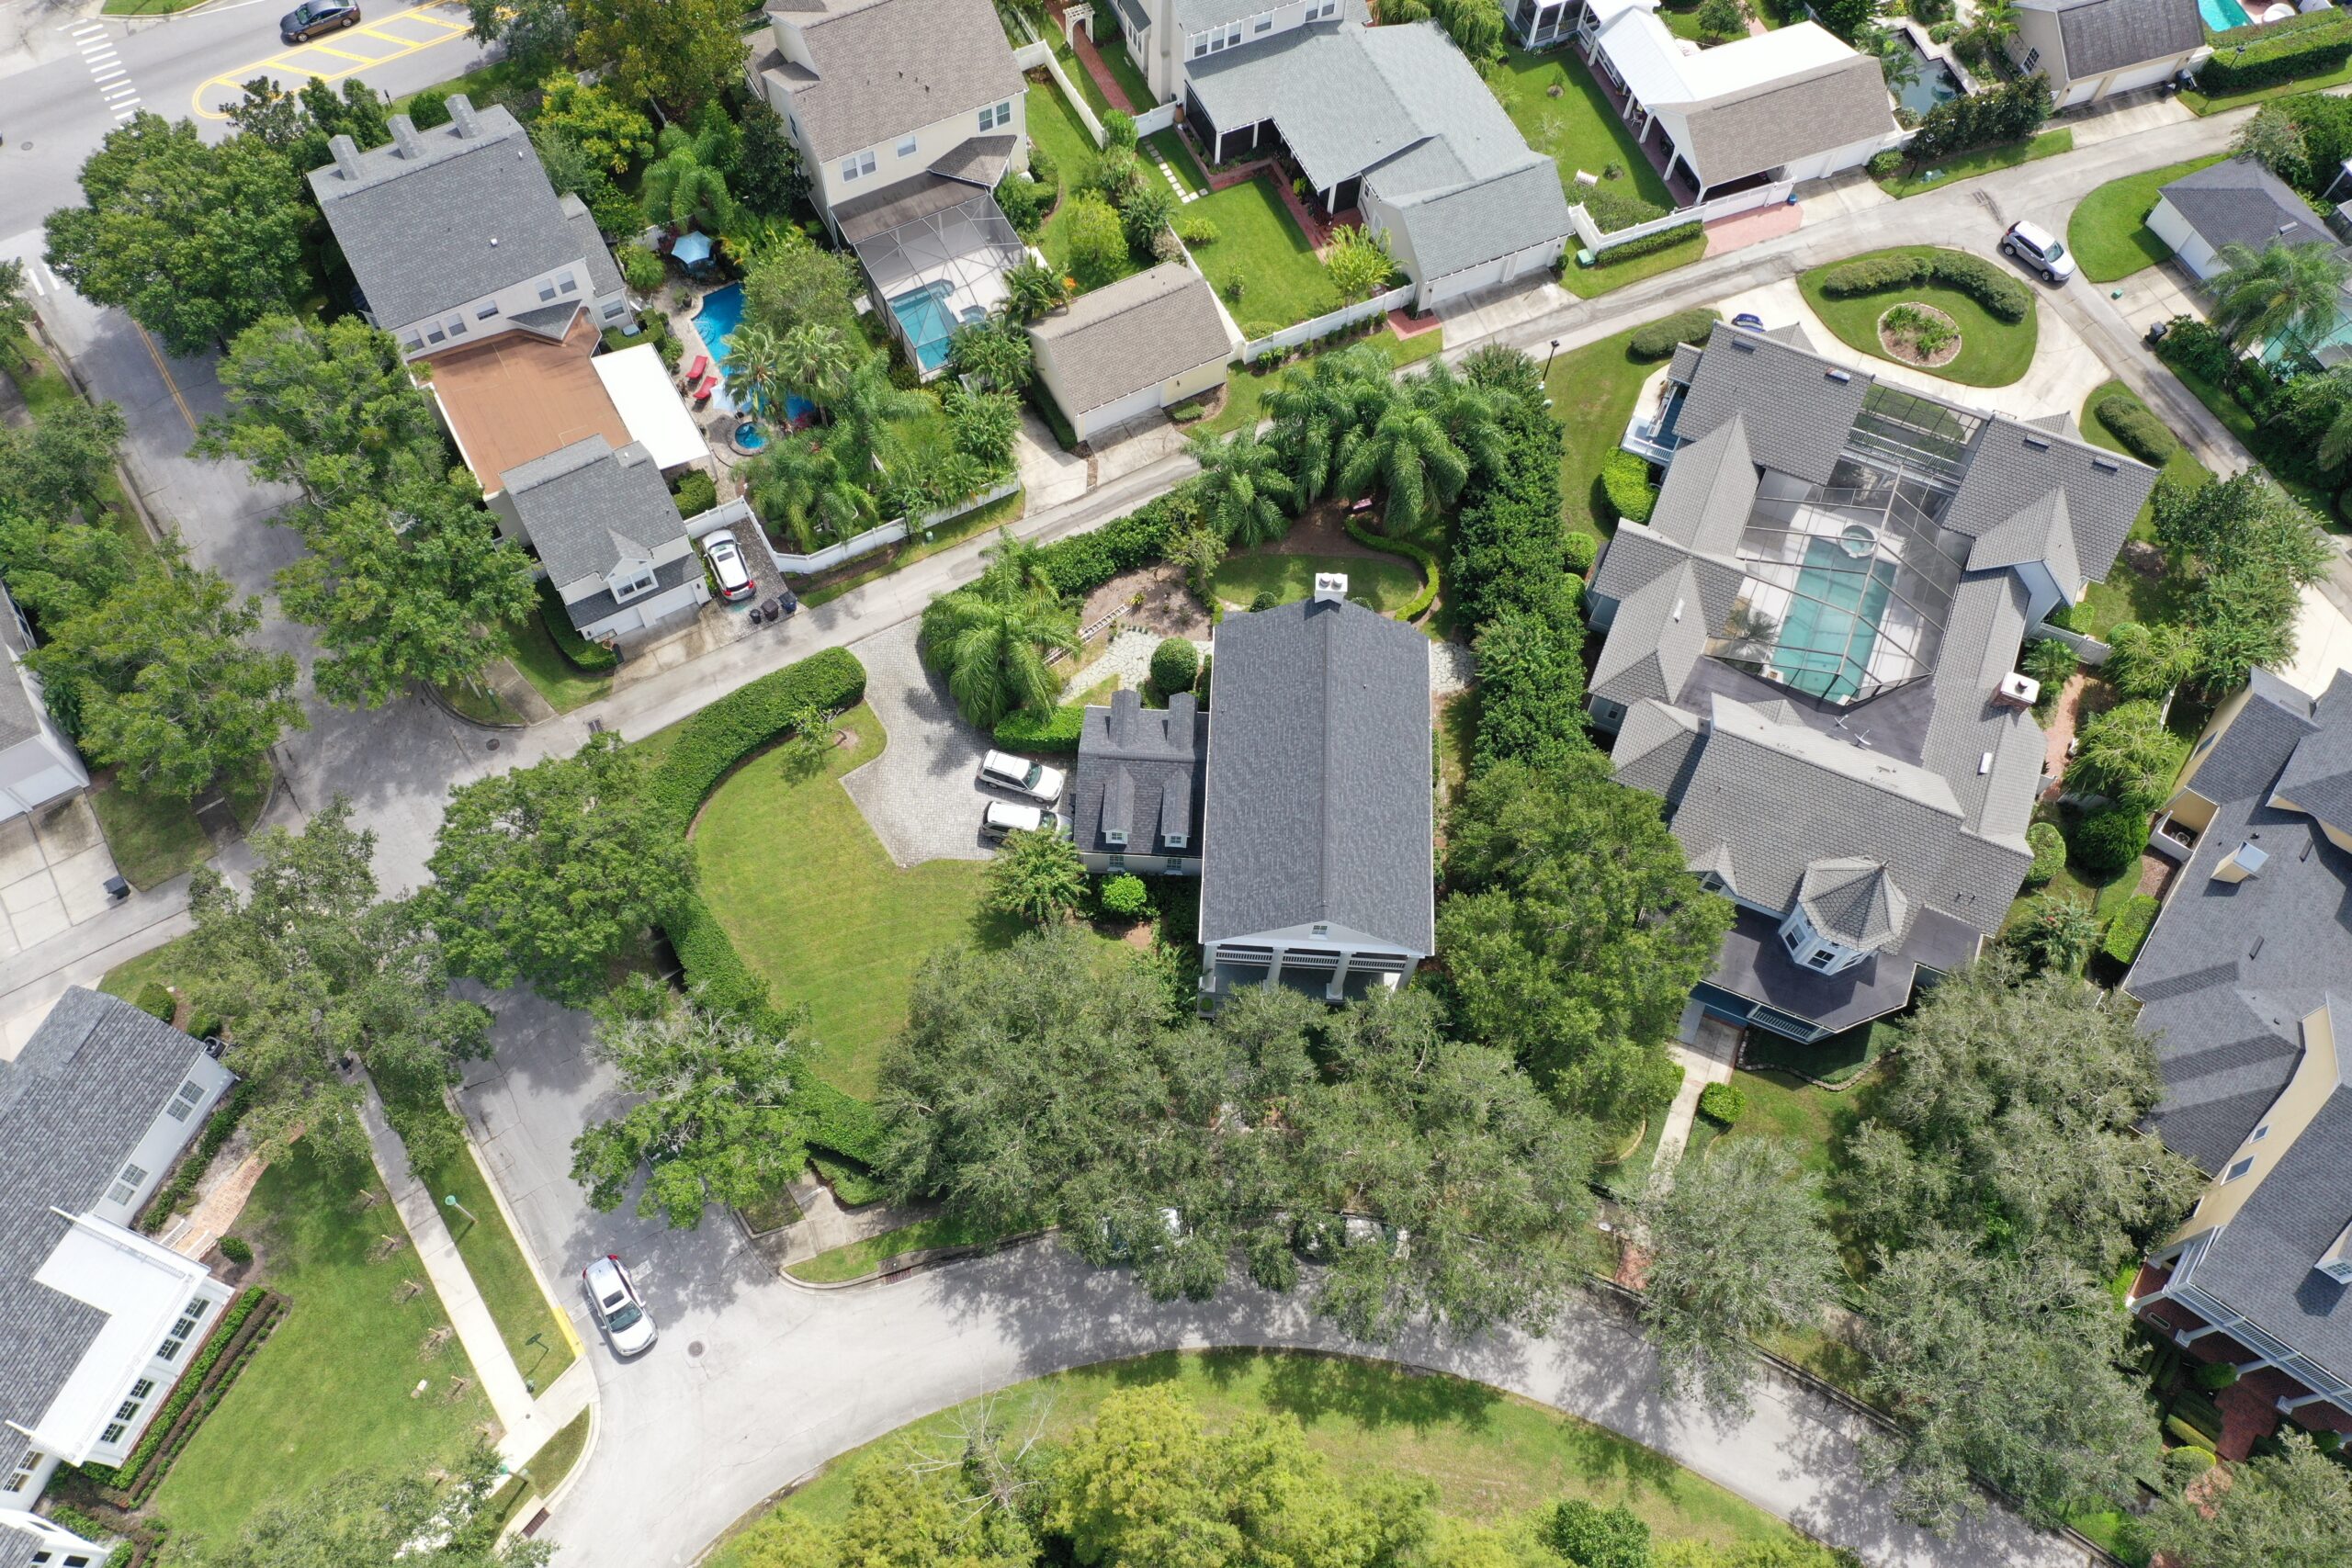 A top view of houses with gray roofs